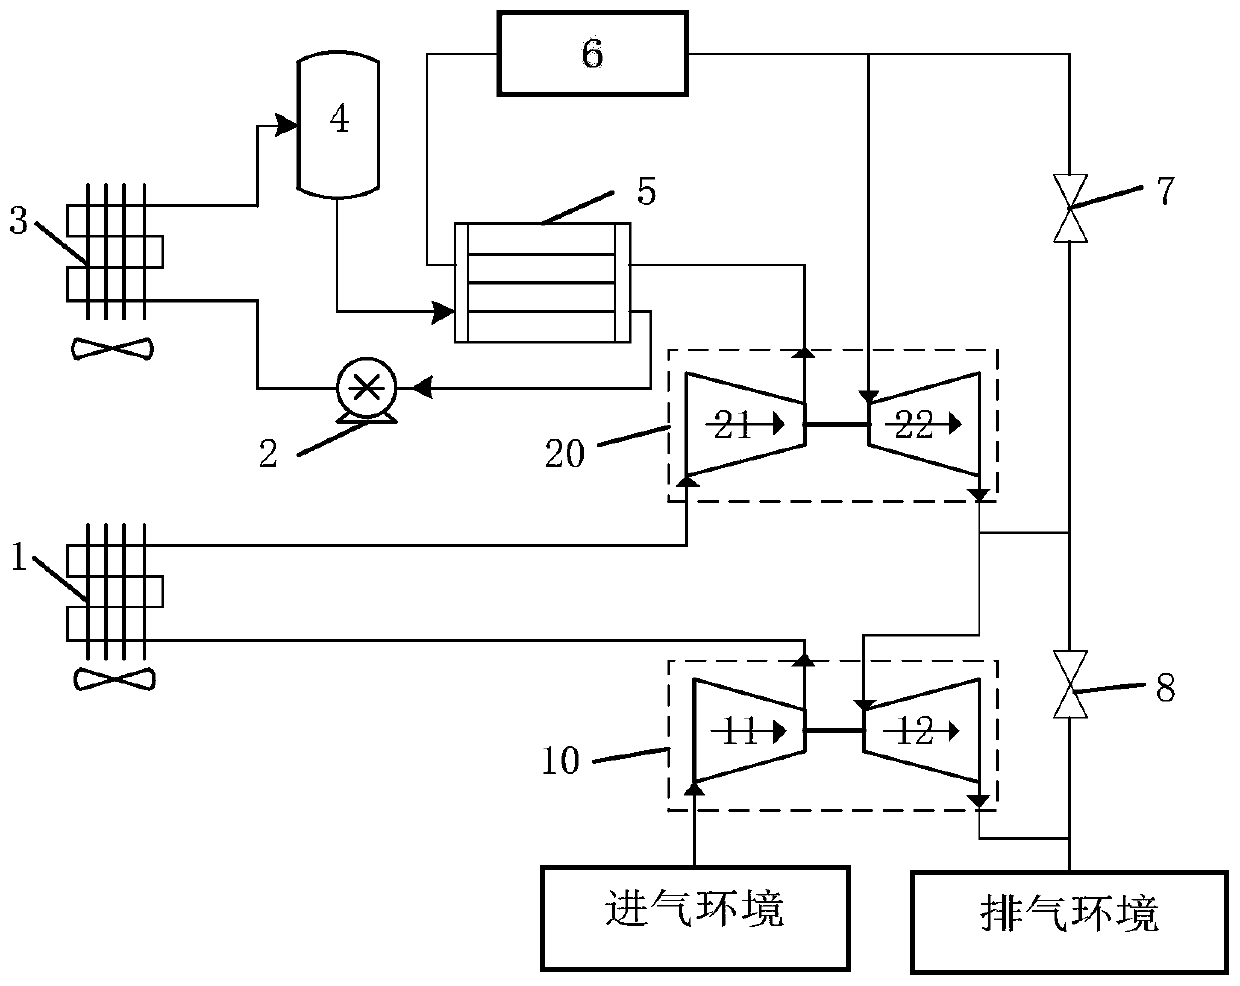 A high-altitude two-stage turbocharger cooling system and its control method